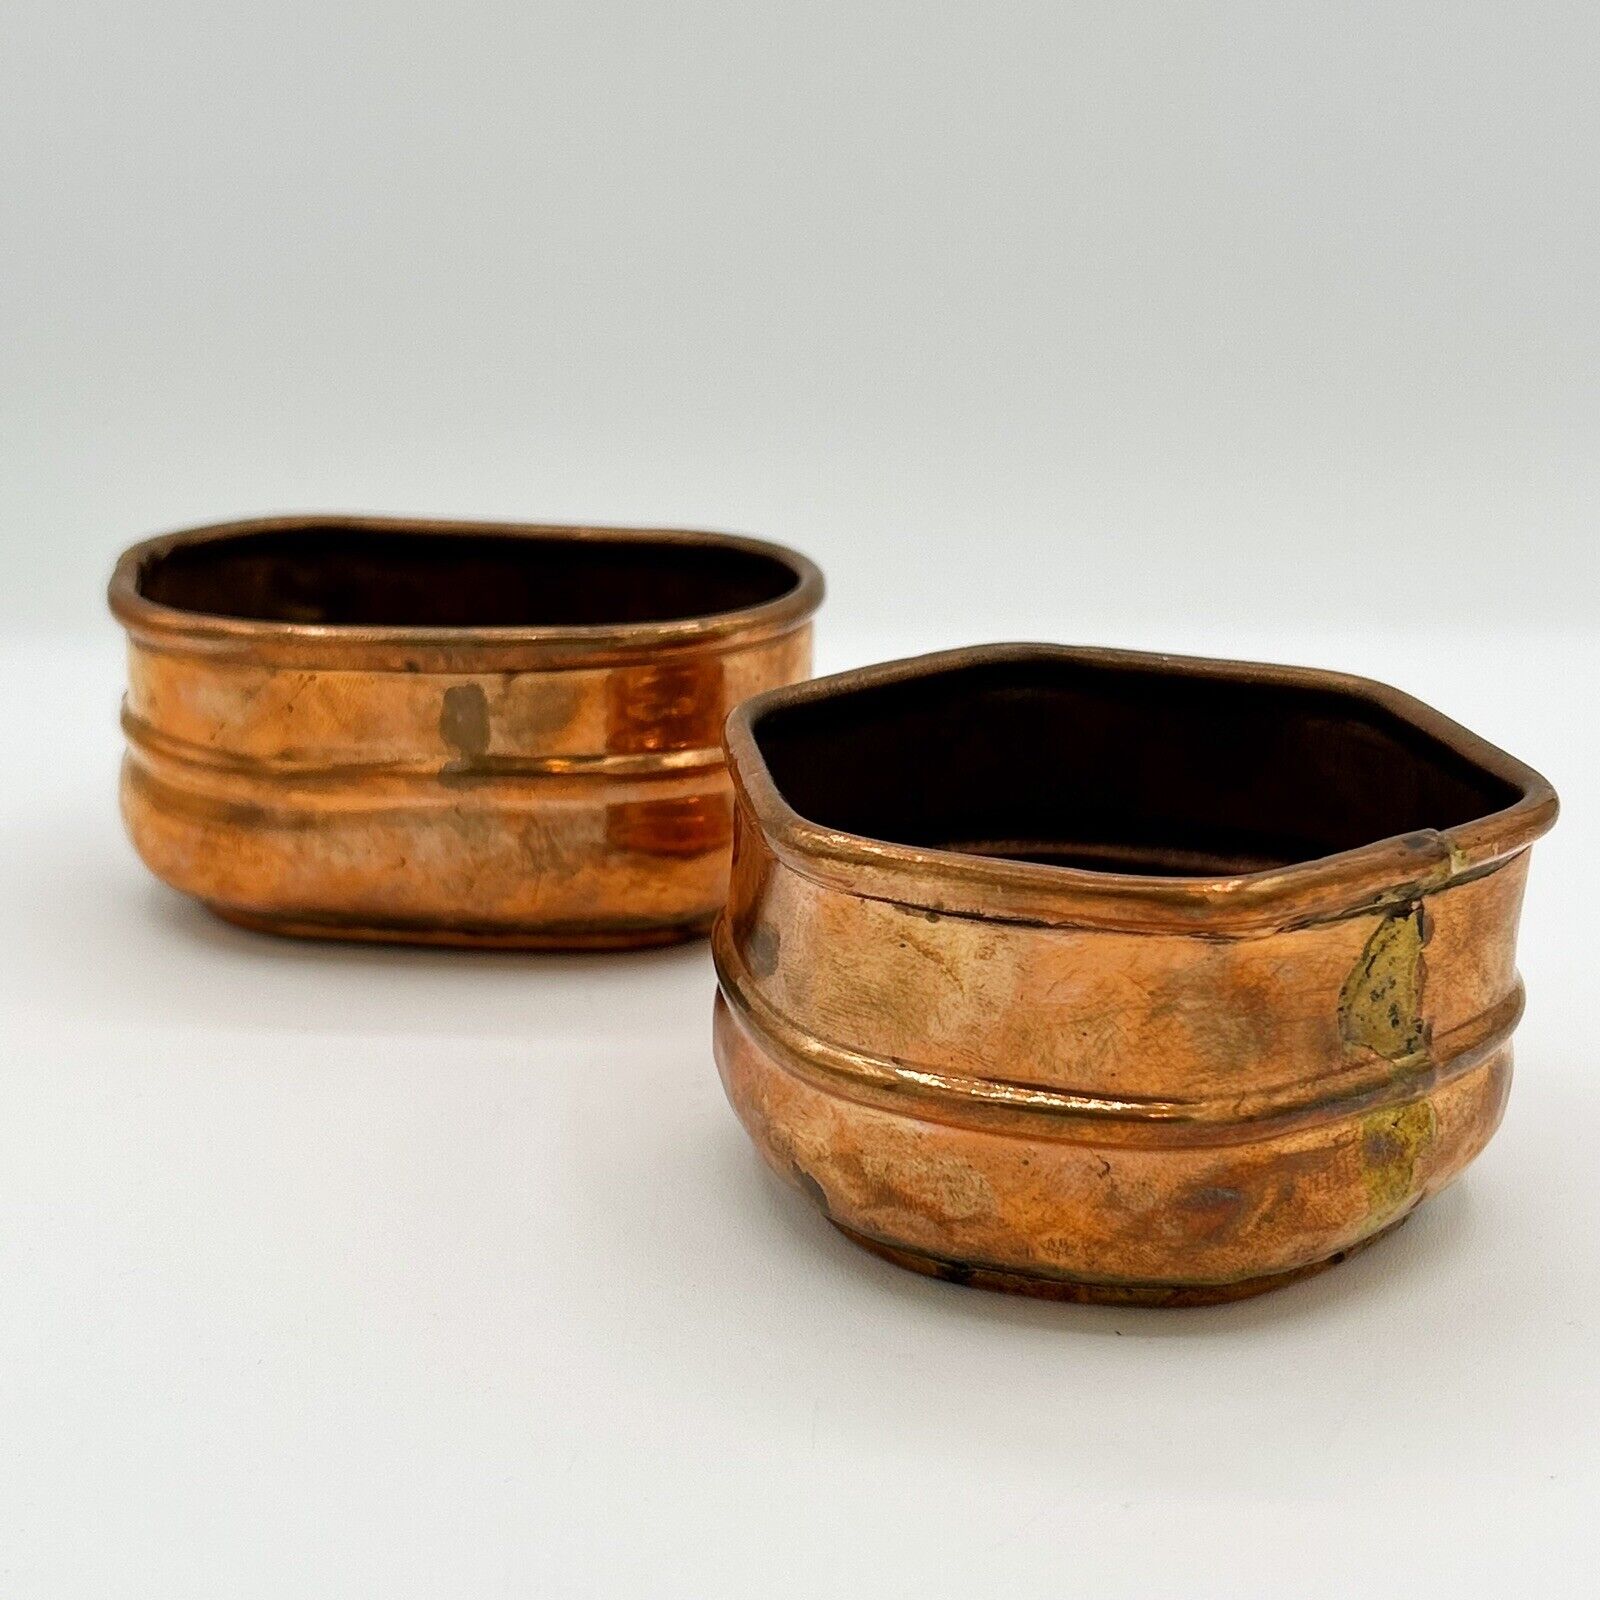  Vintage Copper Planters Bowls Hexagon Oval Patina Small Set Of 2